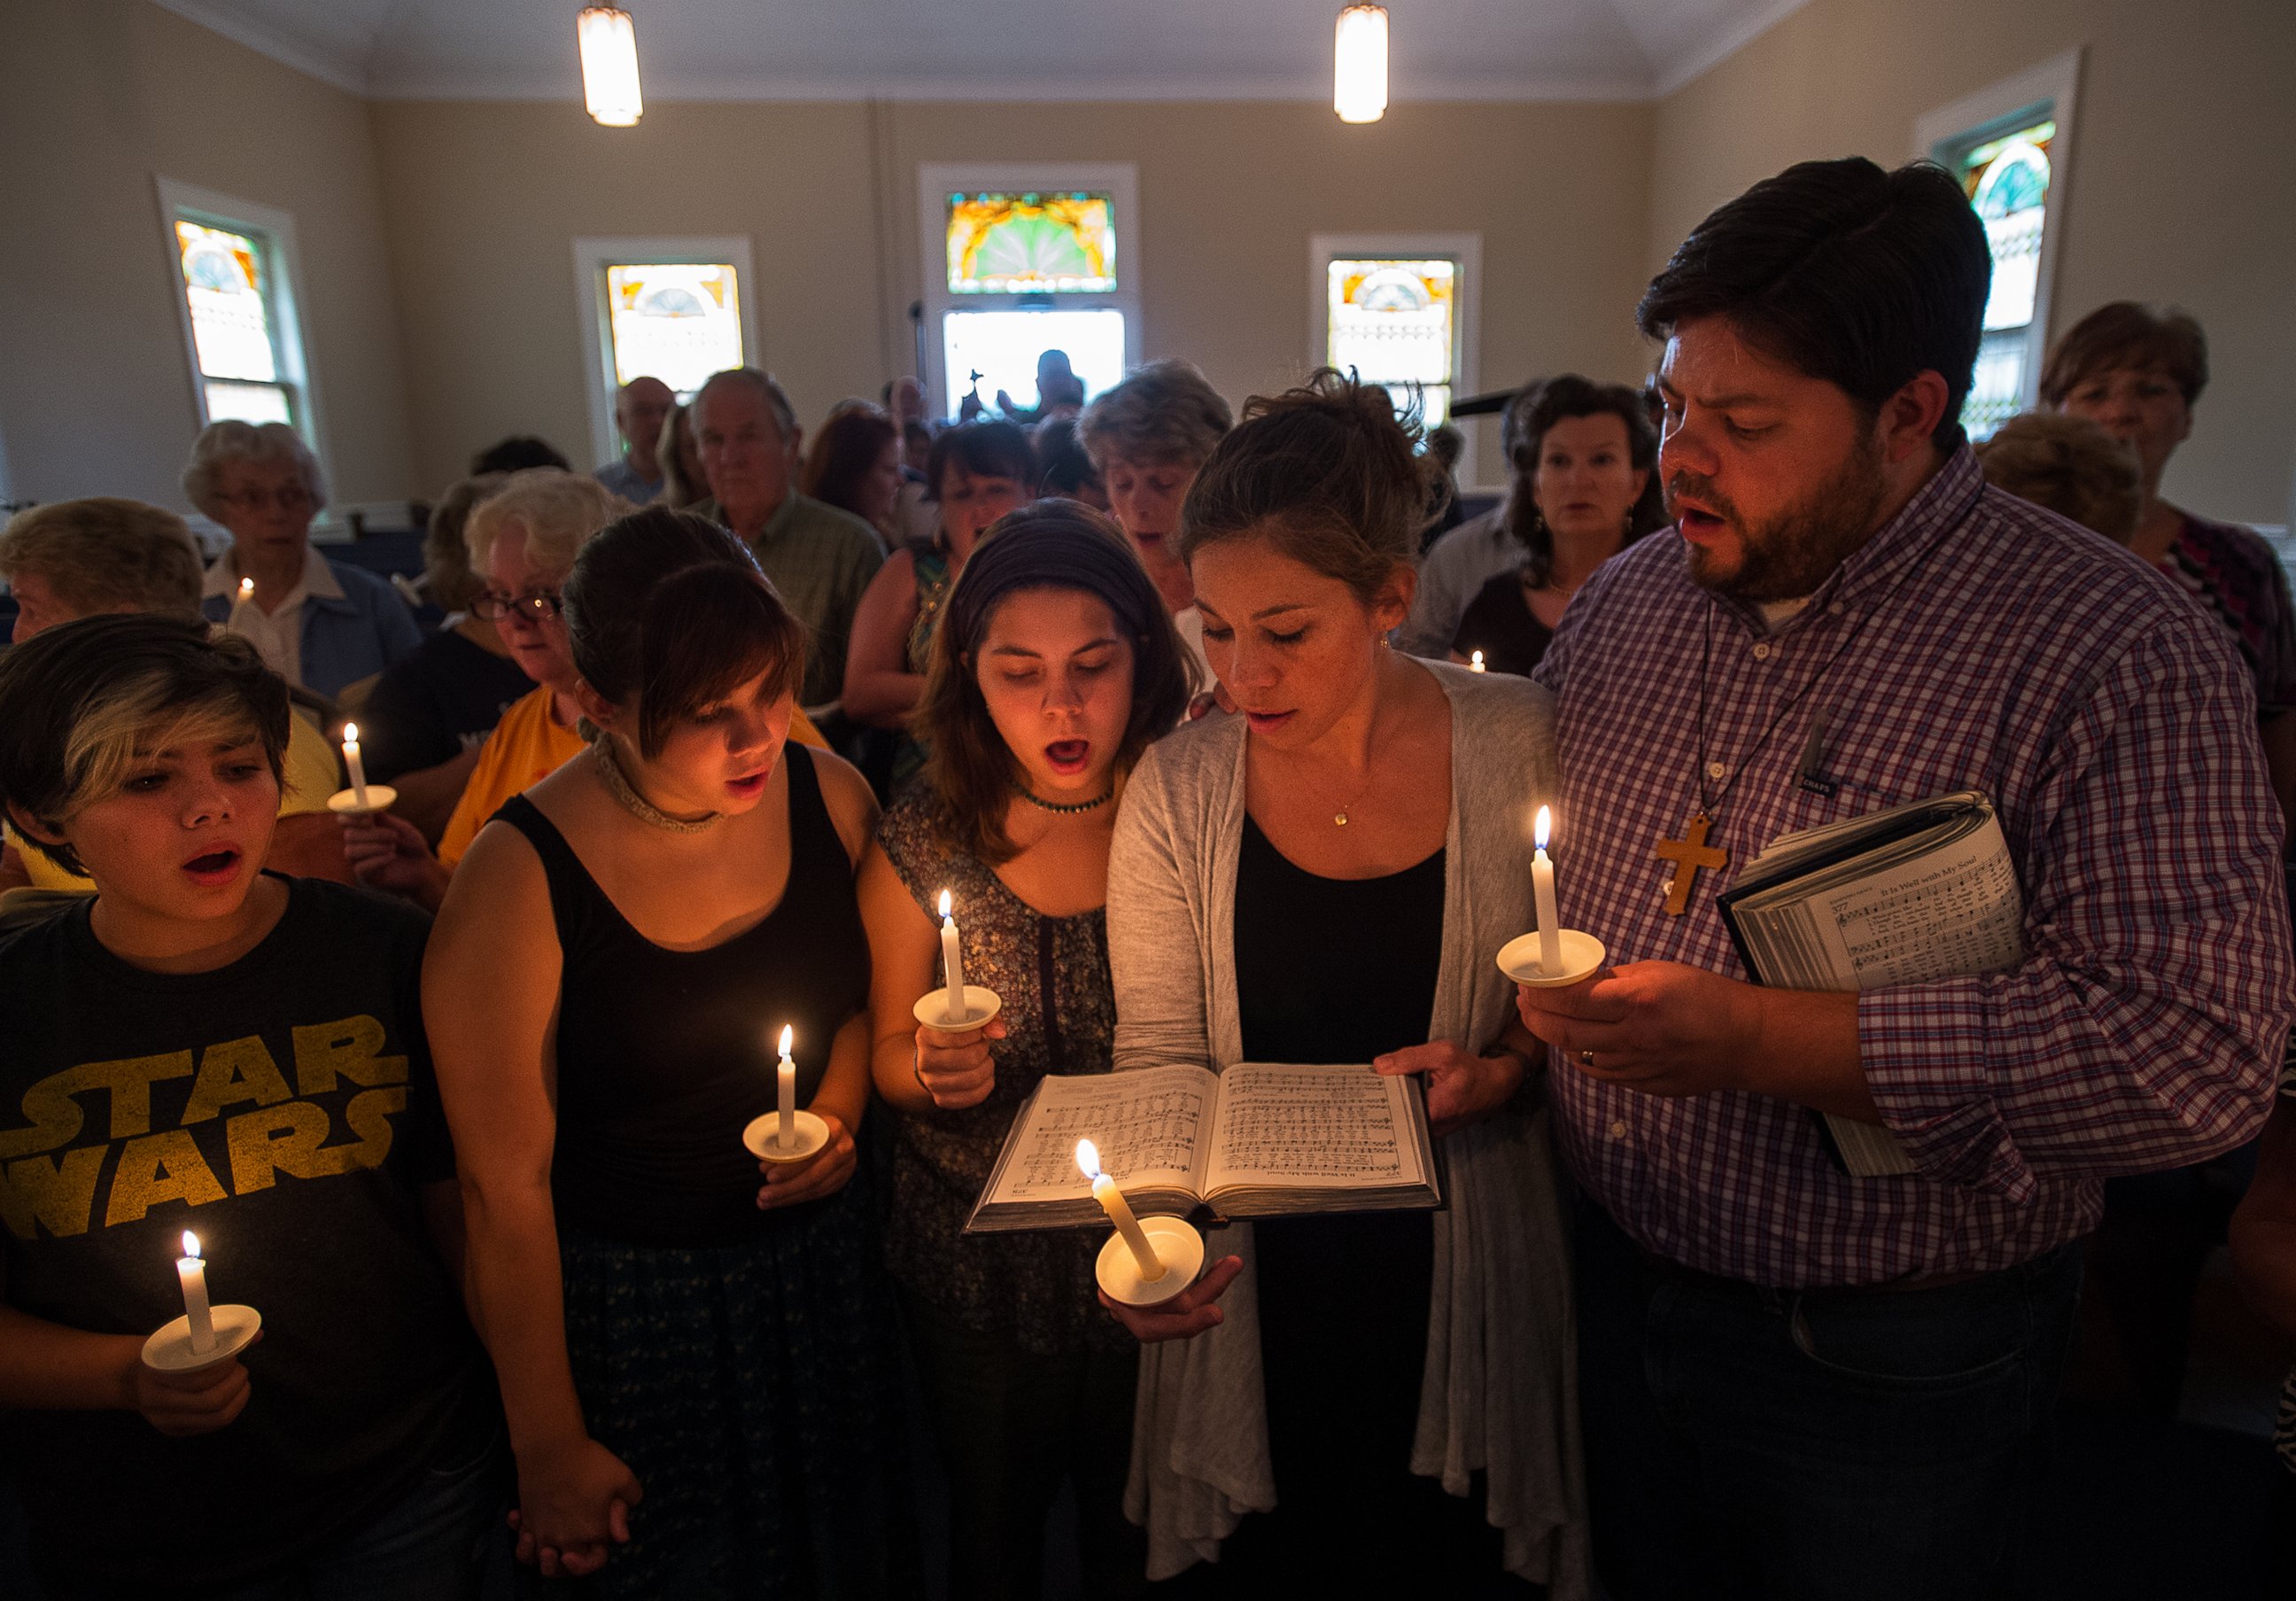 PHOTO: Community supporters sing a hymn during a vigil for journalists Alison Parker and Adam Ward, who were killed during a shooting in Moneta, Va., Aug. 26, 2015.